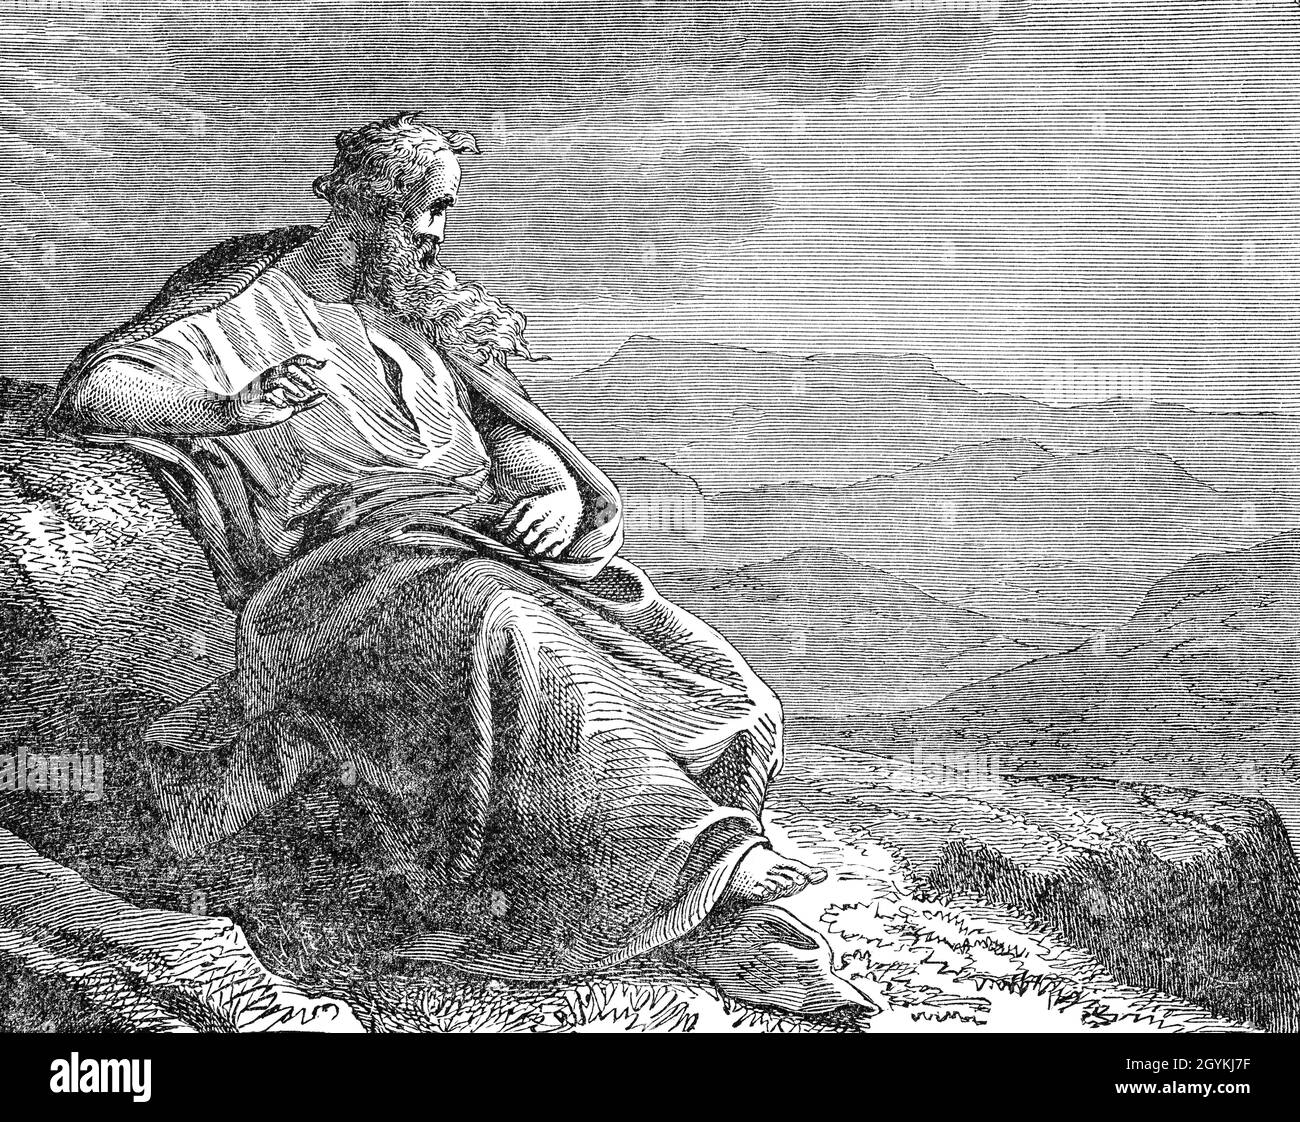 A late 19th Century illustration from the Book of Genesis of Moses on Mount Nebo, viewing the 'Promised Land', the geographic area God declared to give to his chosen people, the offspring of Abraham. The promised land was in ancient Canaan, on the eastern side of the Mediterranean Sea. Hence perhaps the genocide of the Canaanites. Stock Photo